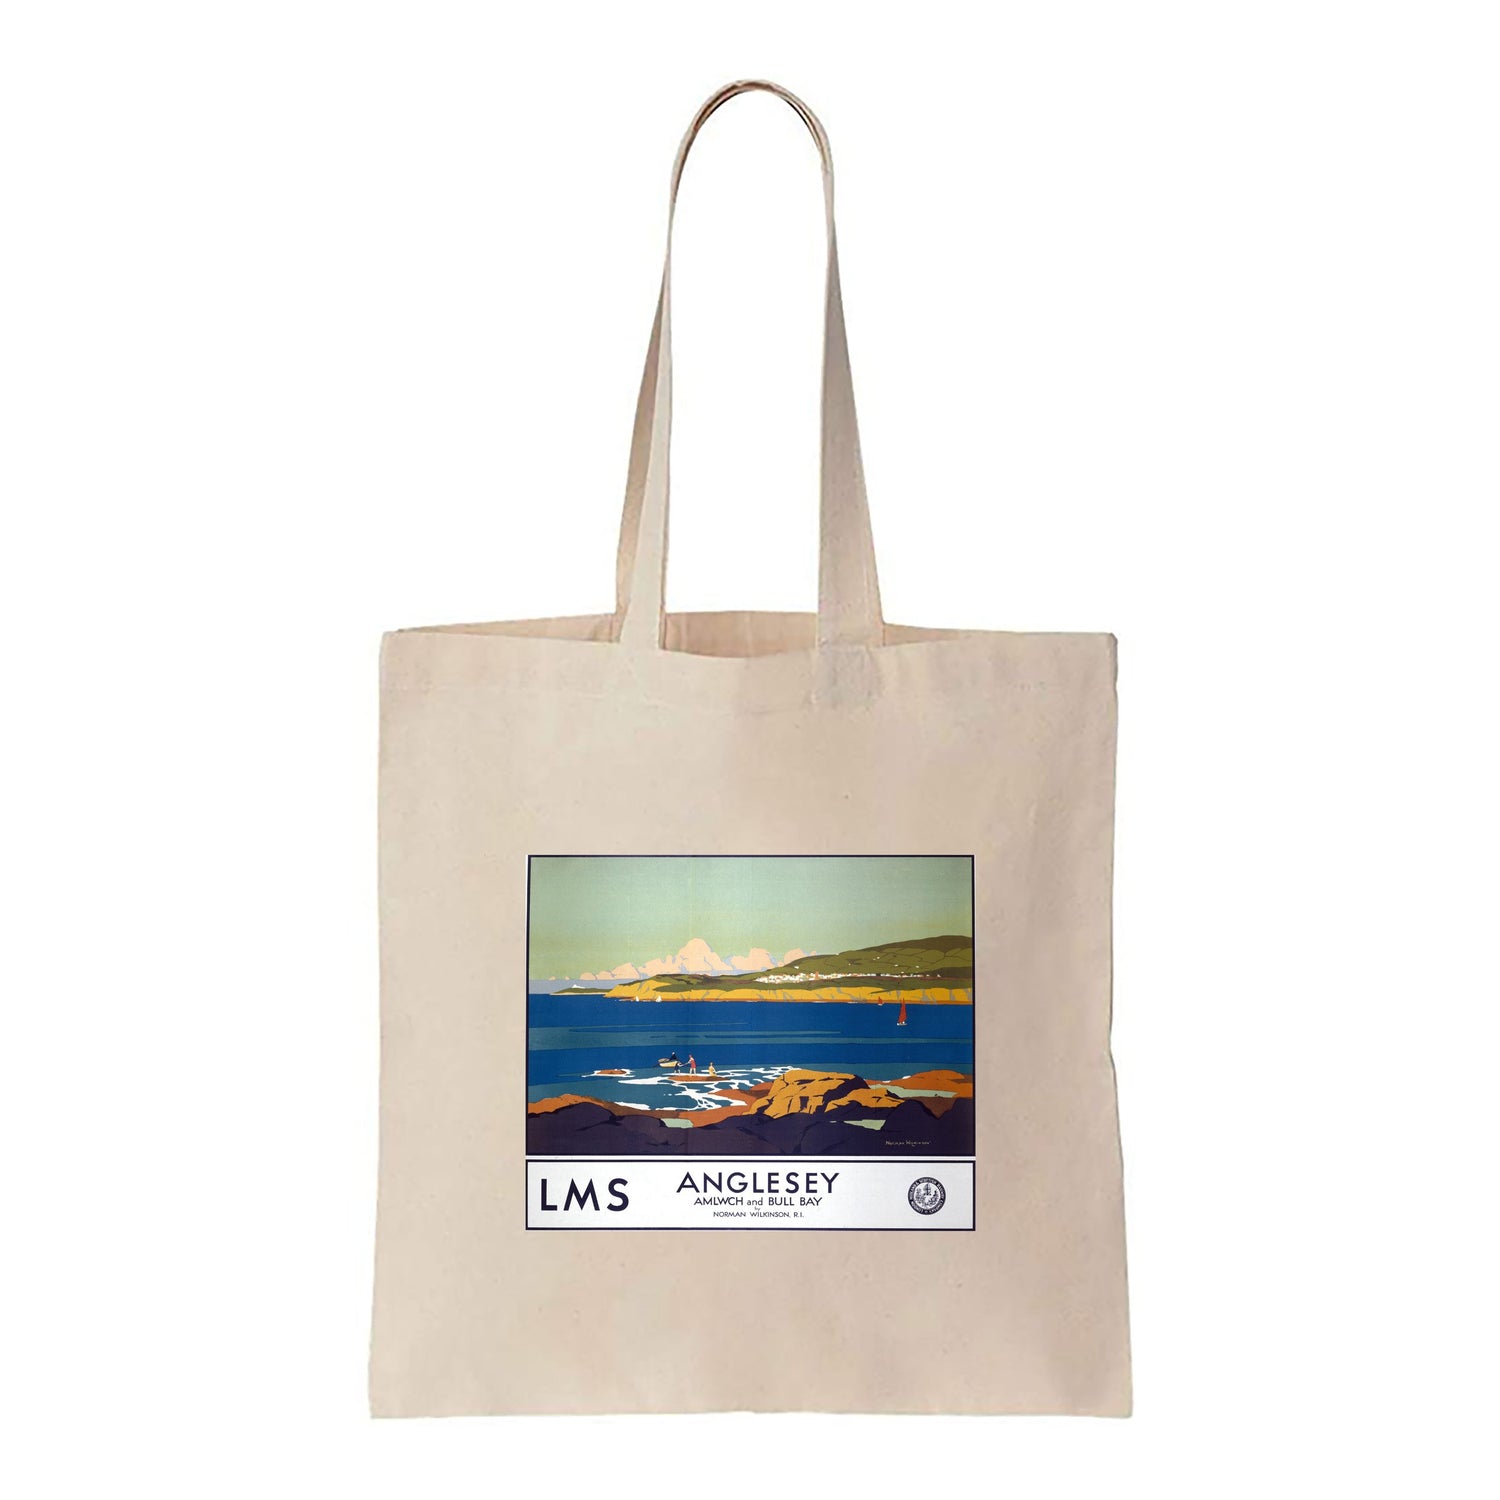 Anglesey - Amlwch and Bull Bay - Canvas Tote Bag